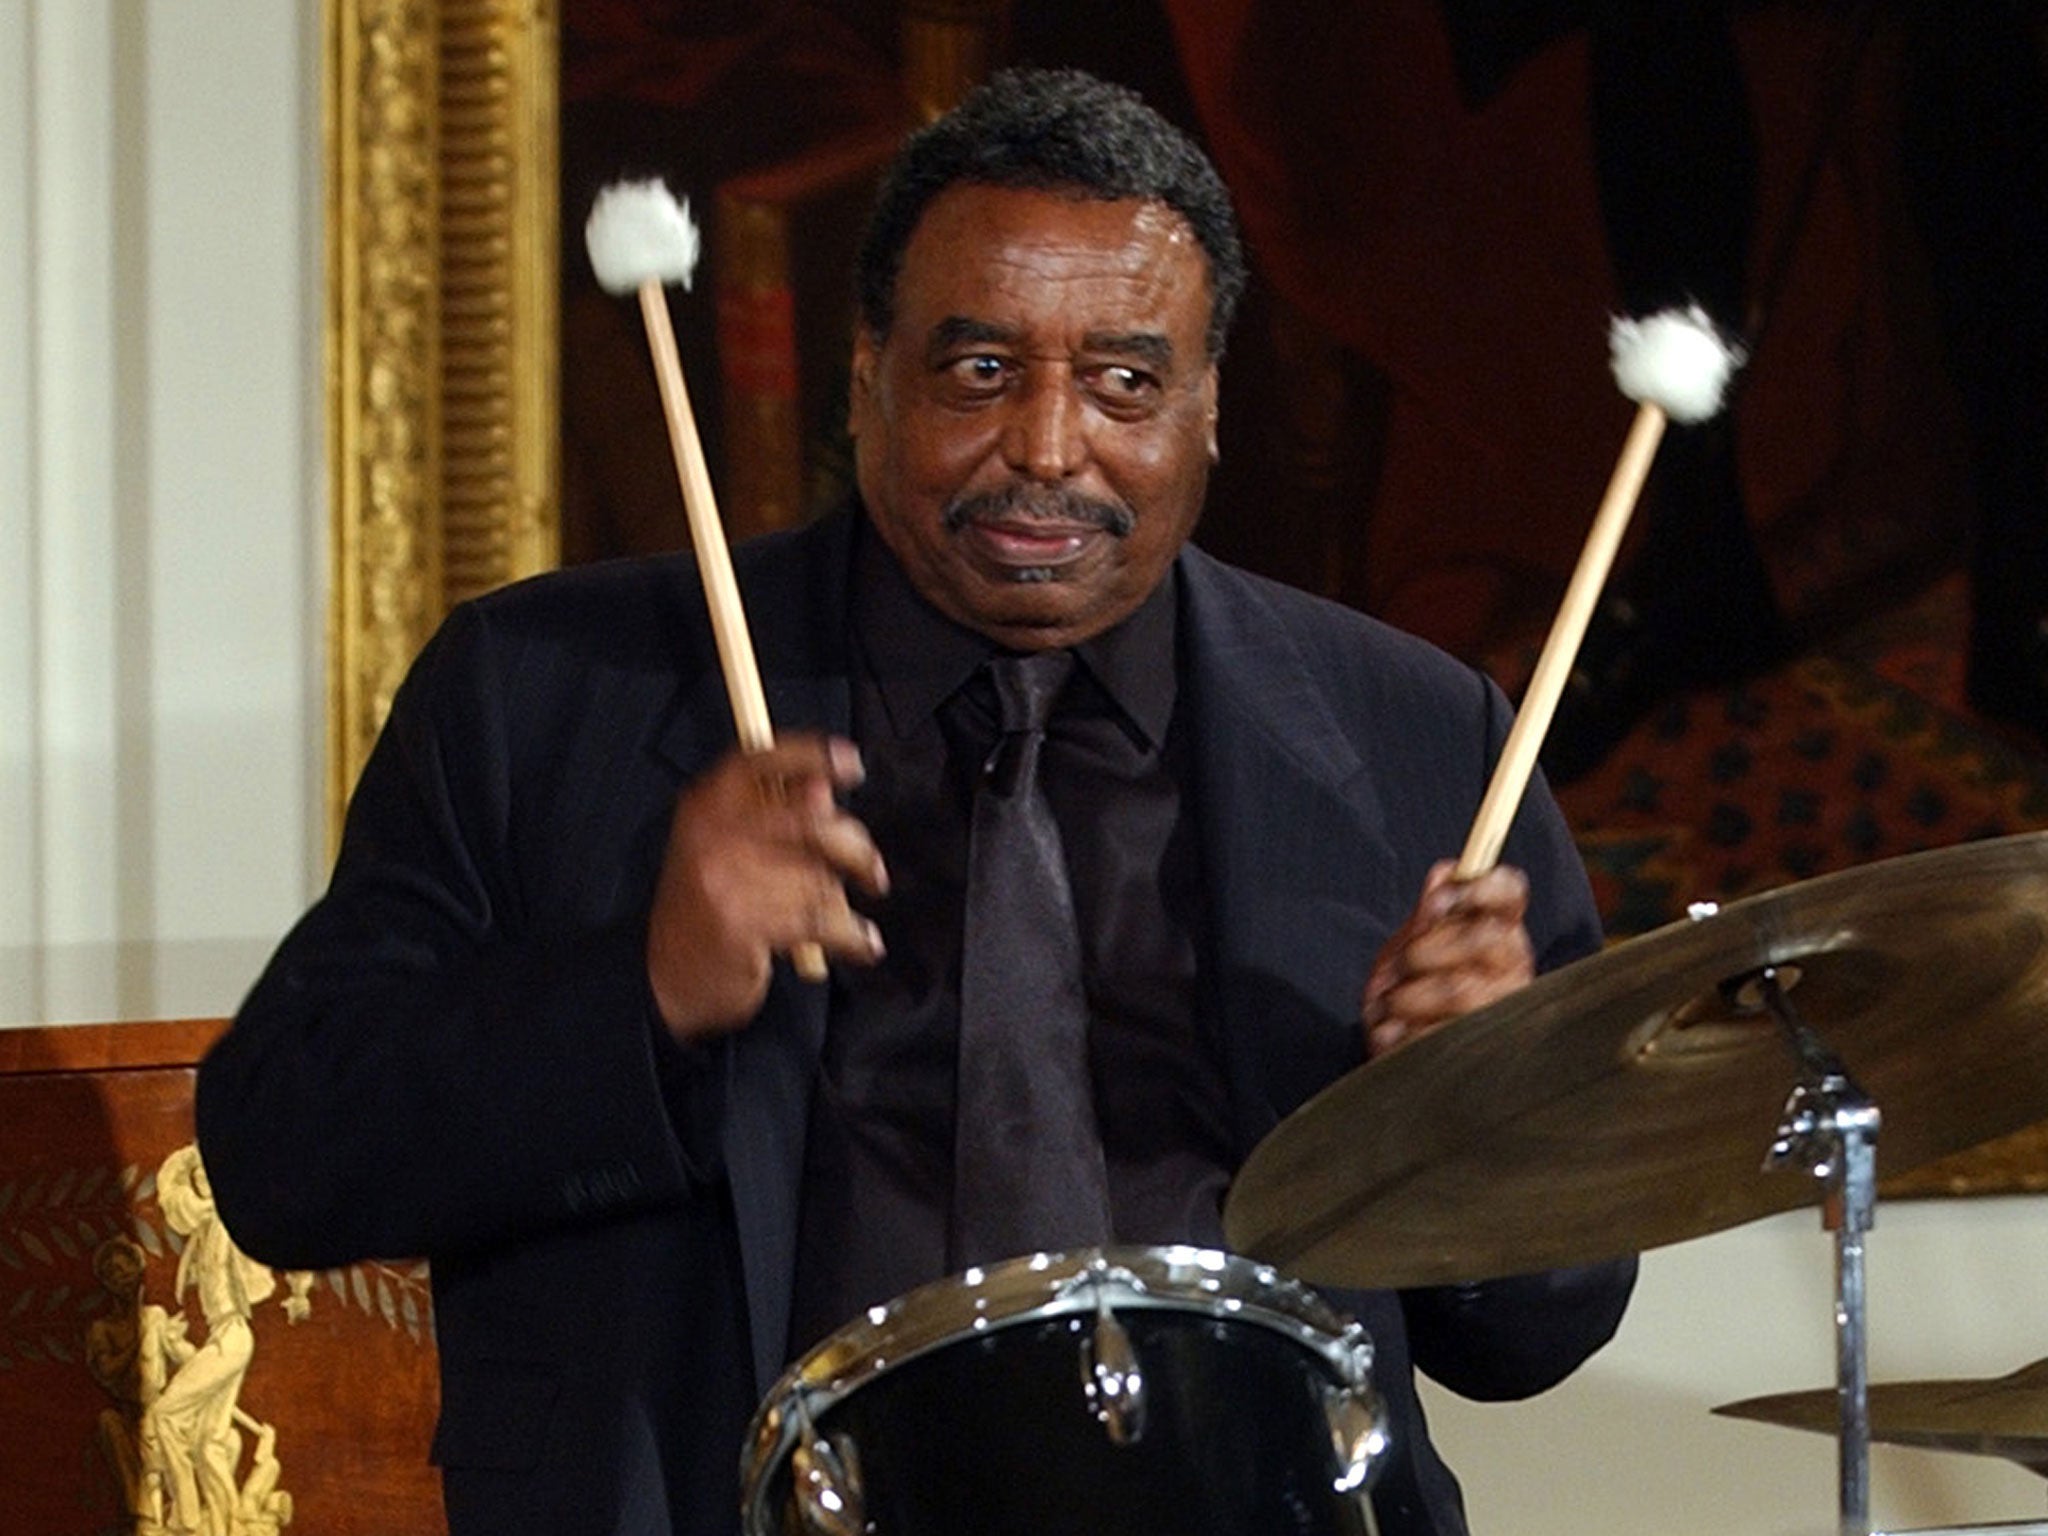 Hamilton performs a drum solo at the White House during a reception to honour Black Music Month in 2004